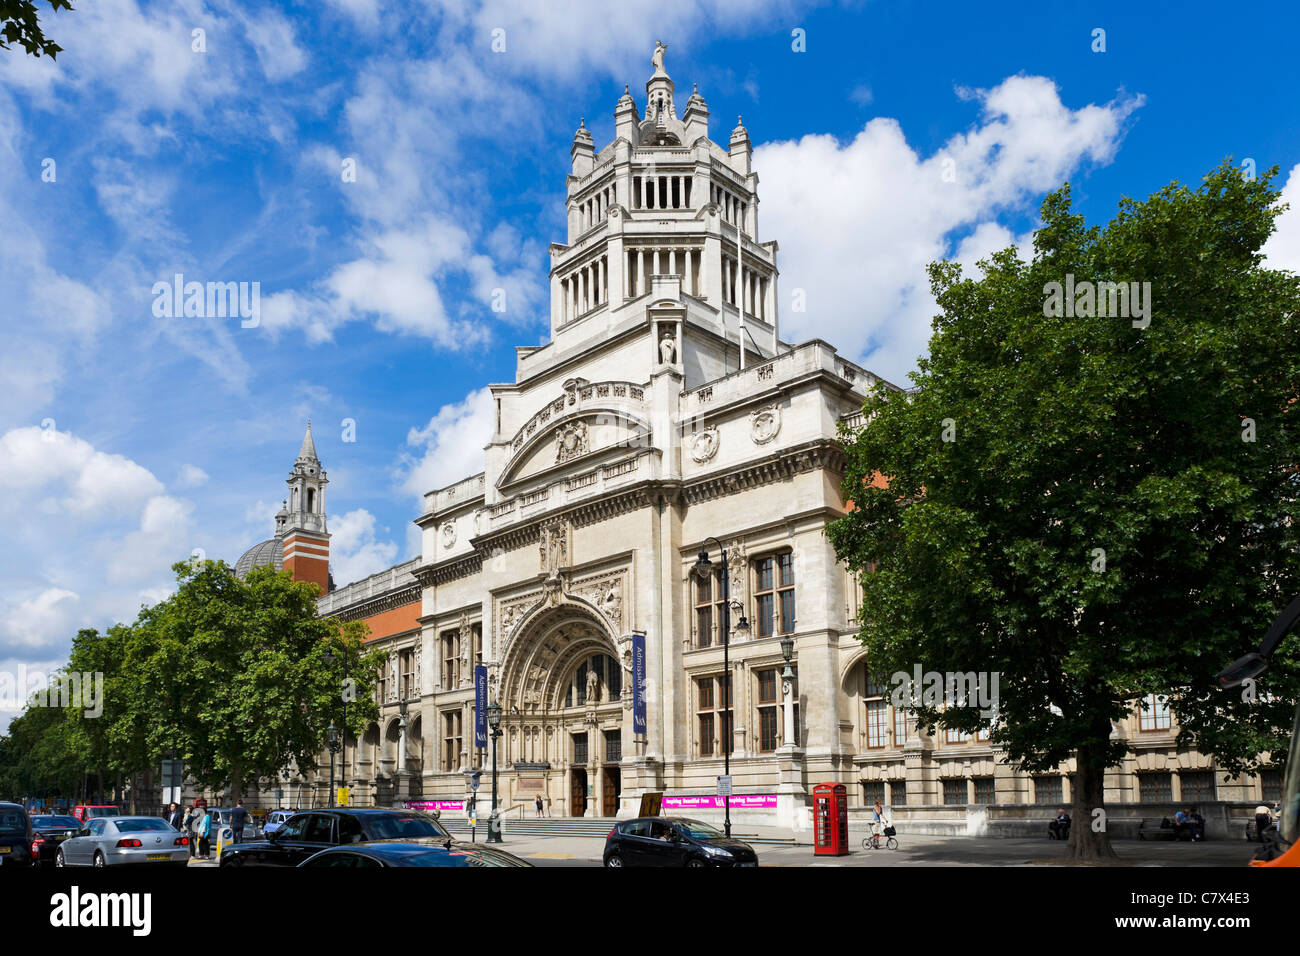 The Victoria and Albert Museum, Exhibition Road, South Kensington, London, England, UK Stock Photo